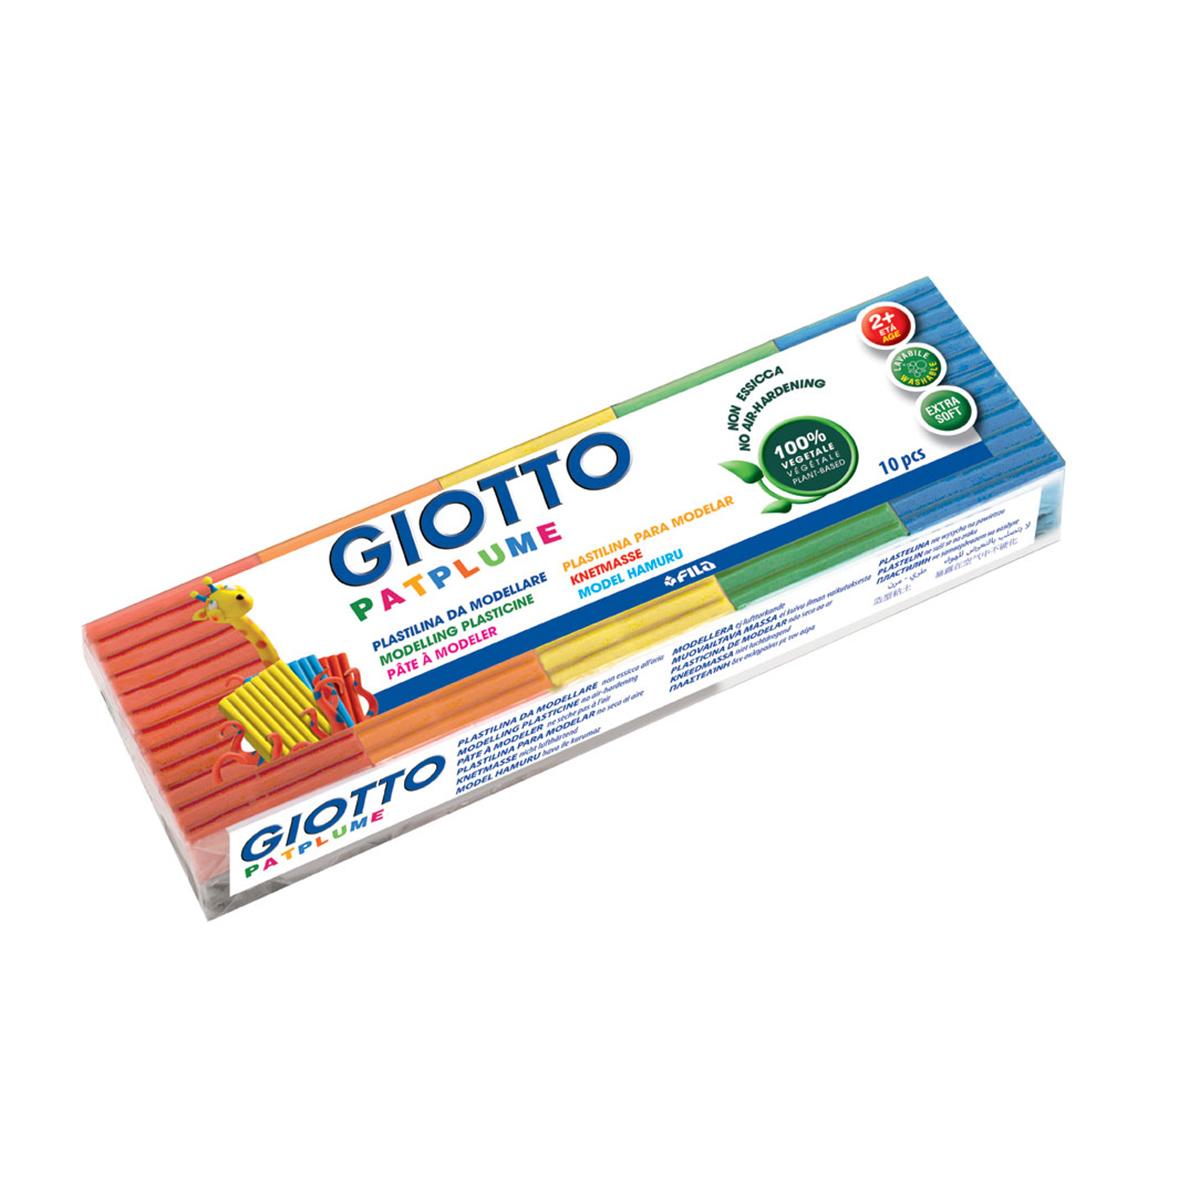 Selected image for GIOTTO Plastelin 10/1 Patplume 500g 513300